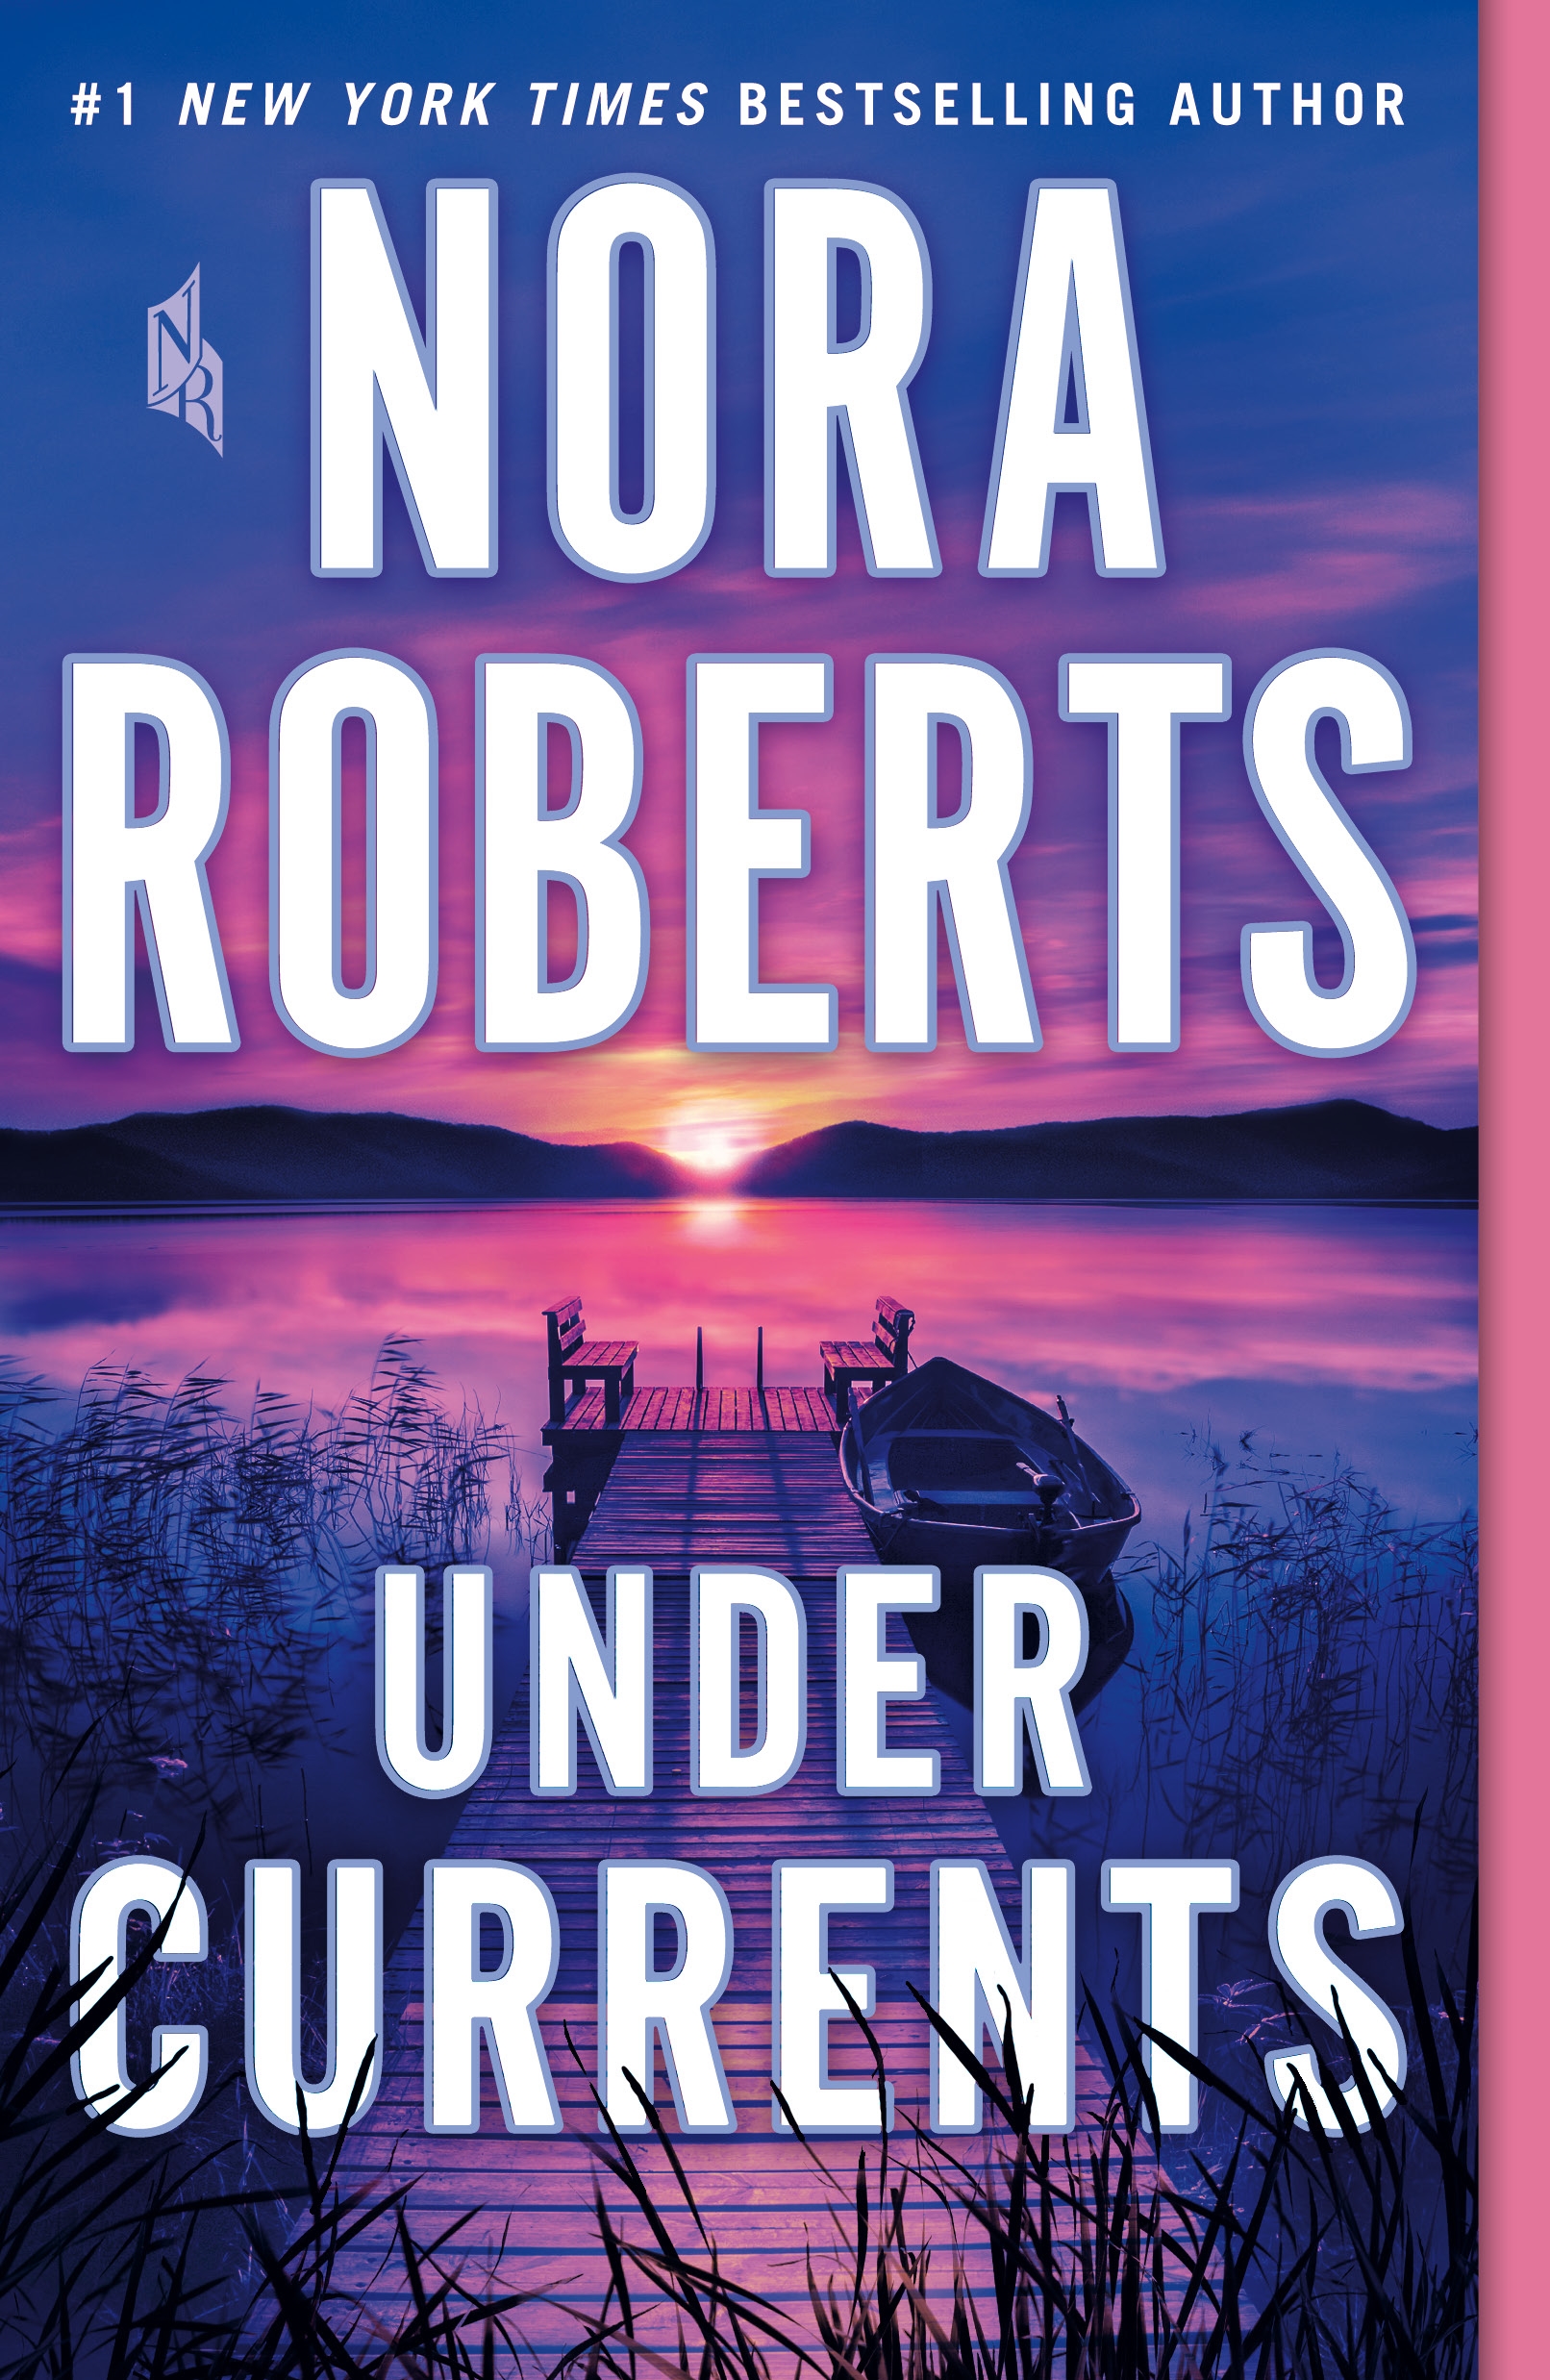 Book “Under Currents” by Nora Roberts — May 5, 2020